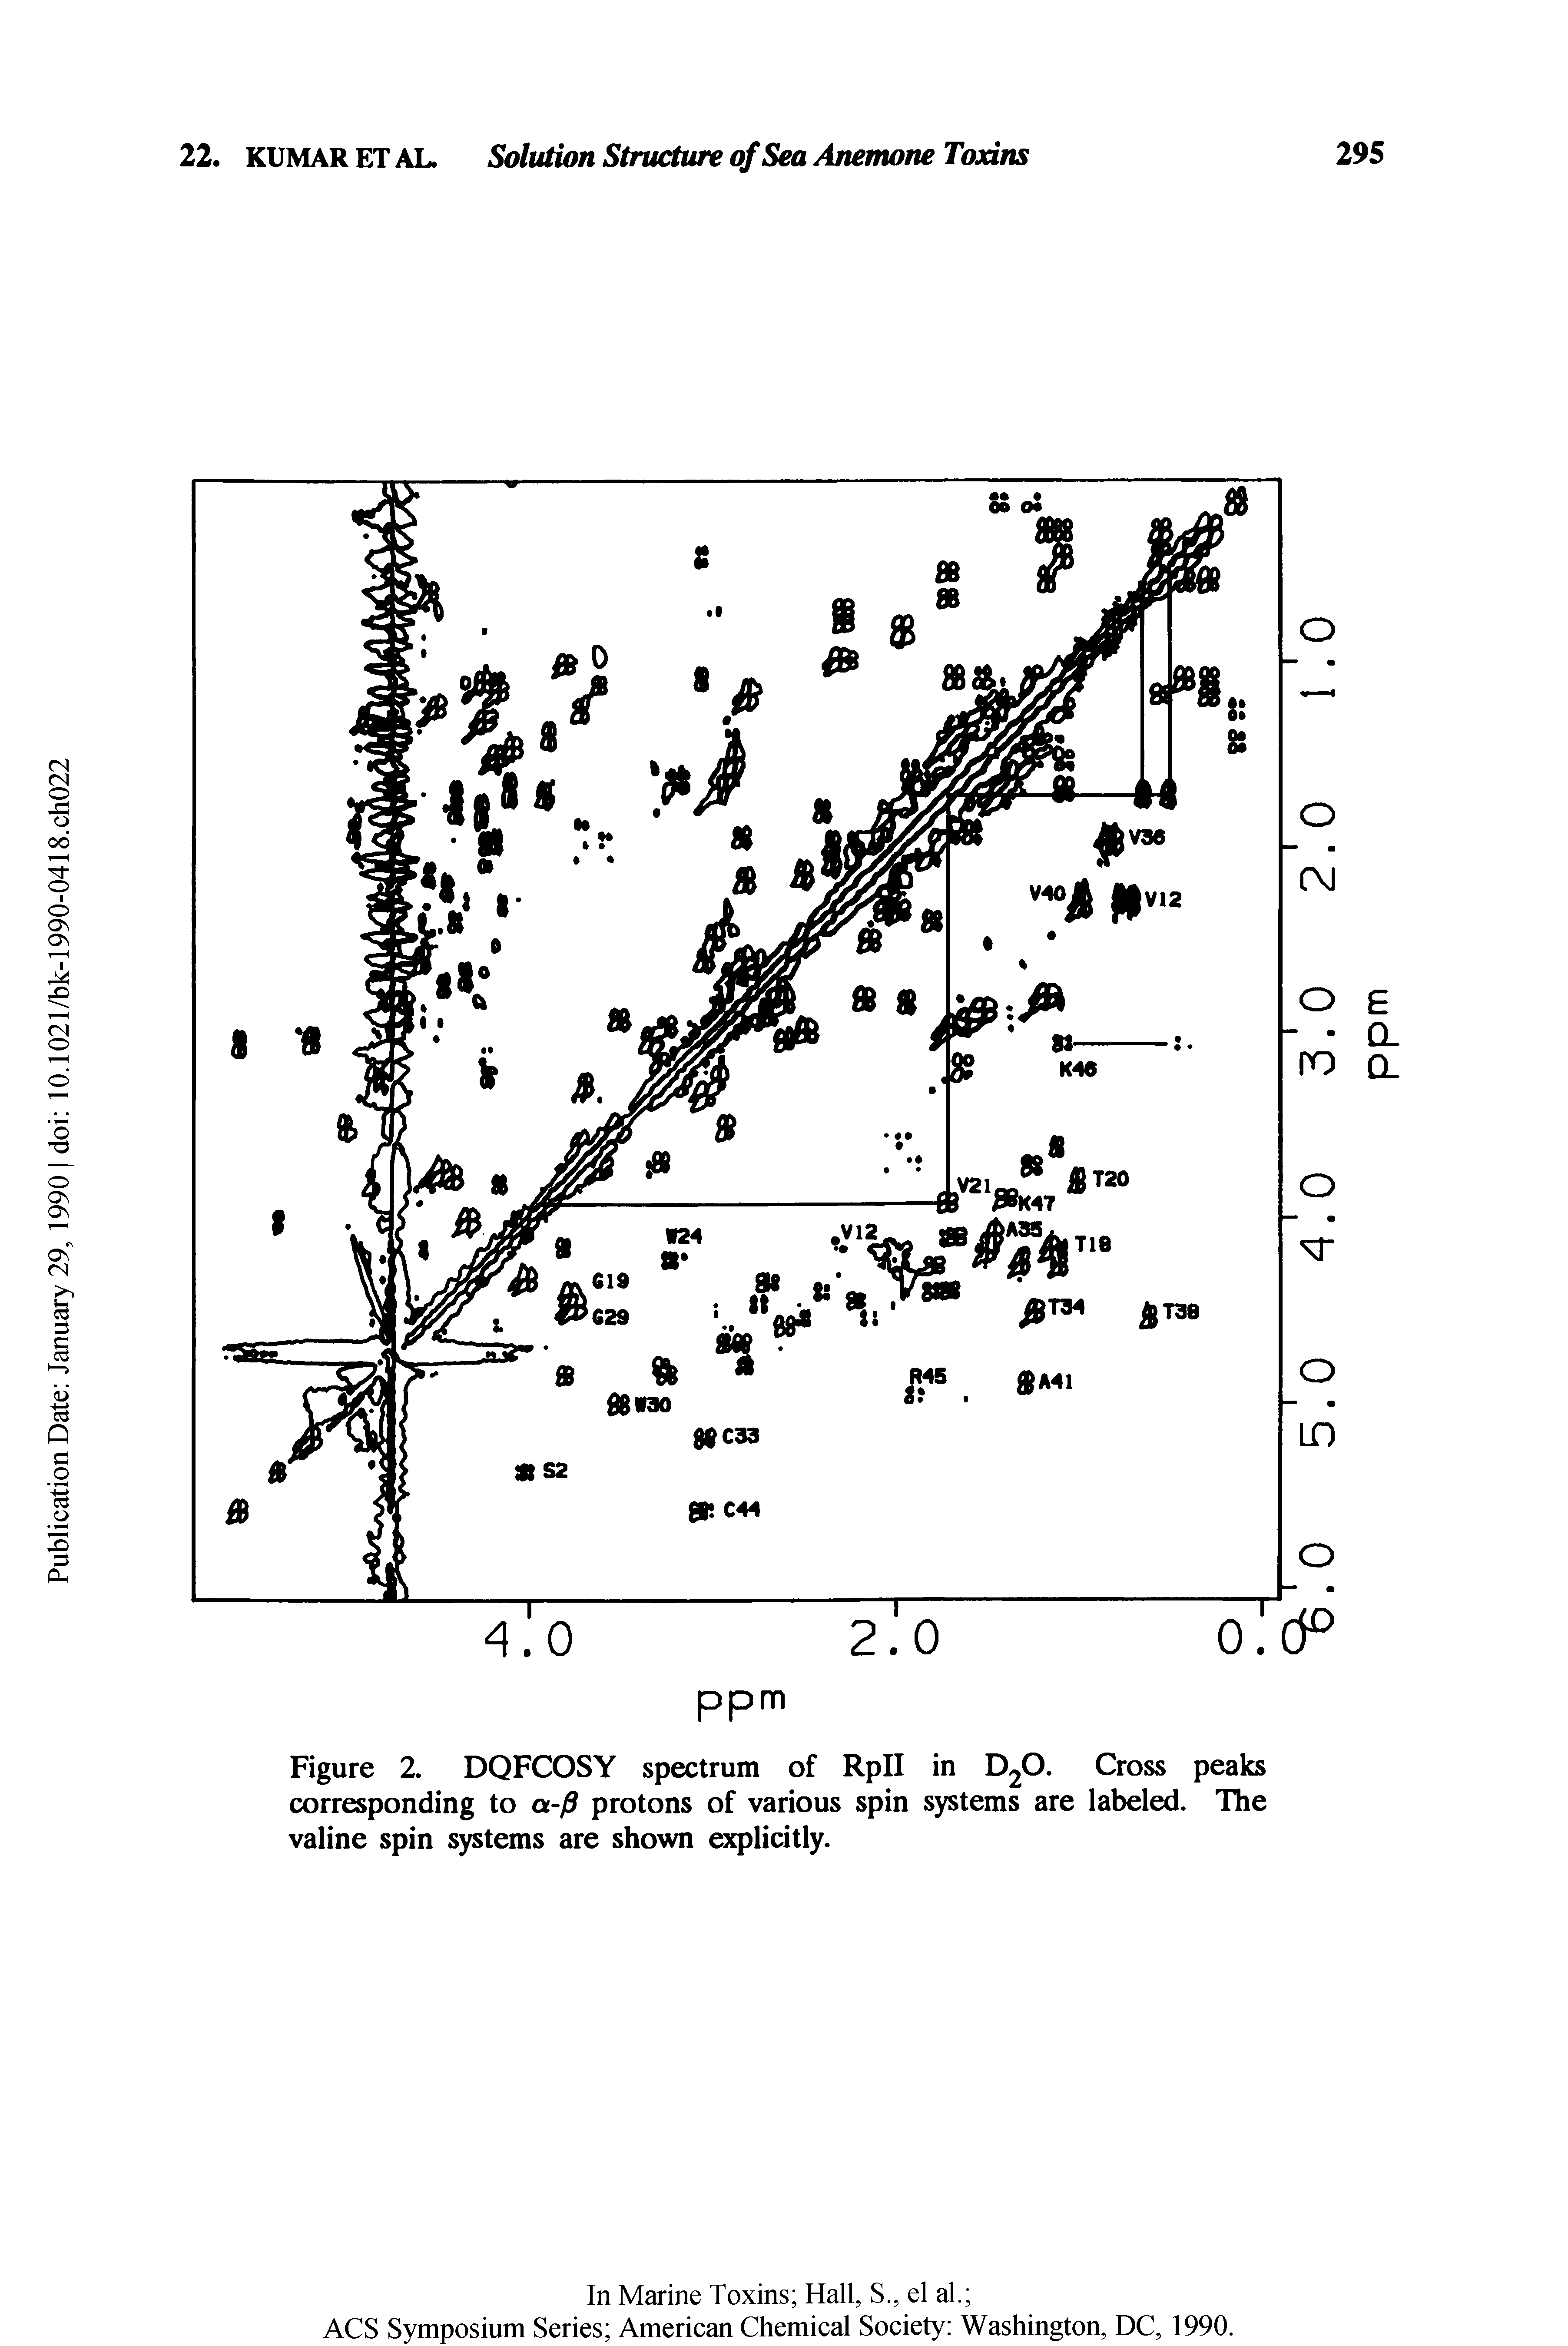 Figure 2. DQFCOSY spectrum of RpII in D2O. Cross peaks corresponding to a-P protons of various spin systems are labeled. The valine spin systems are shown explicitly.